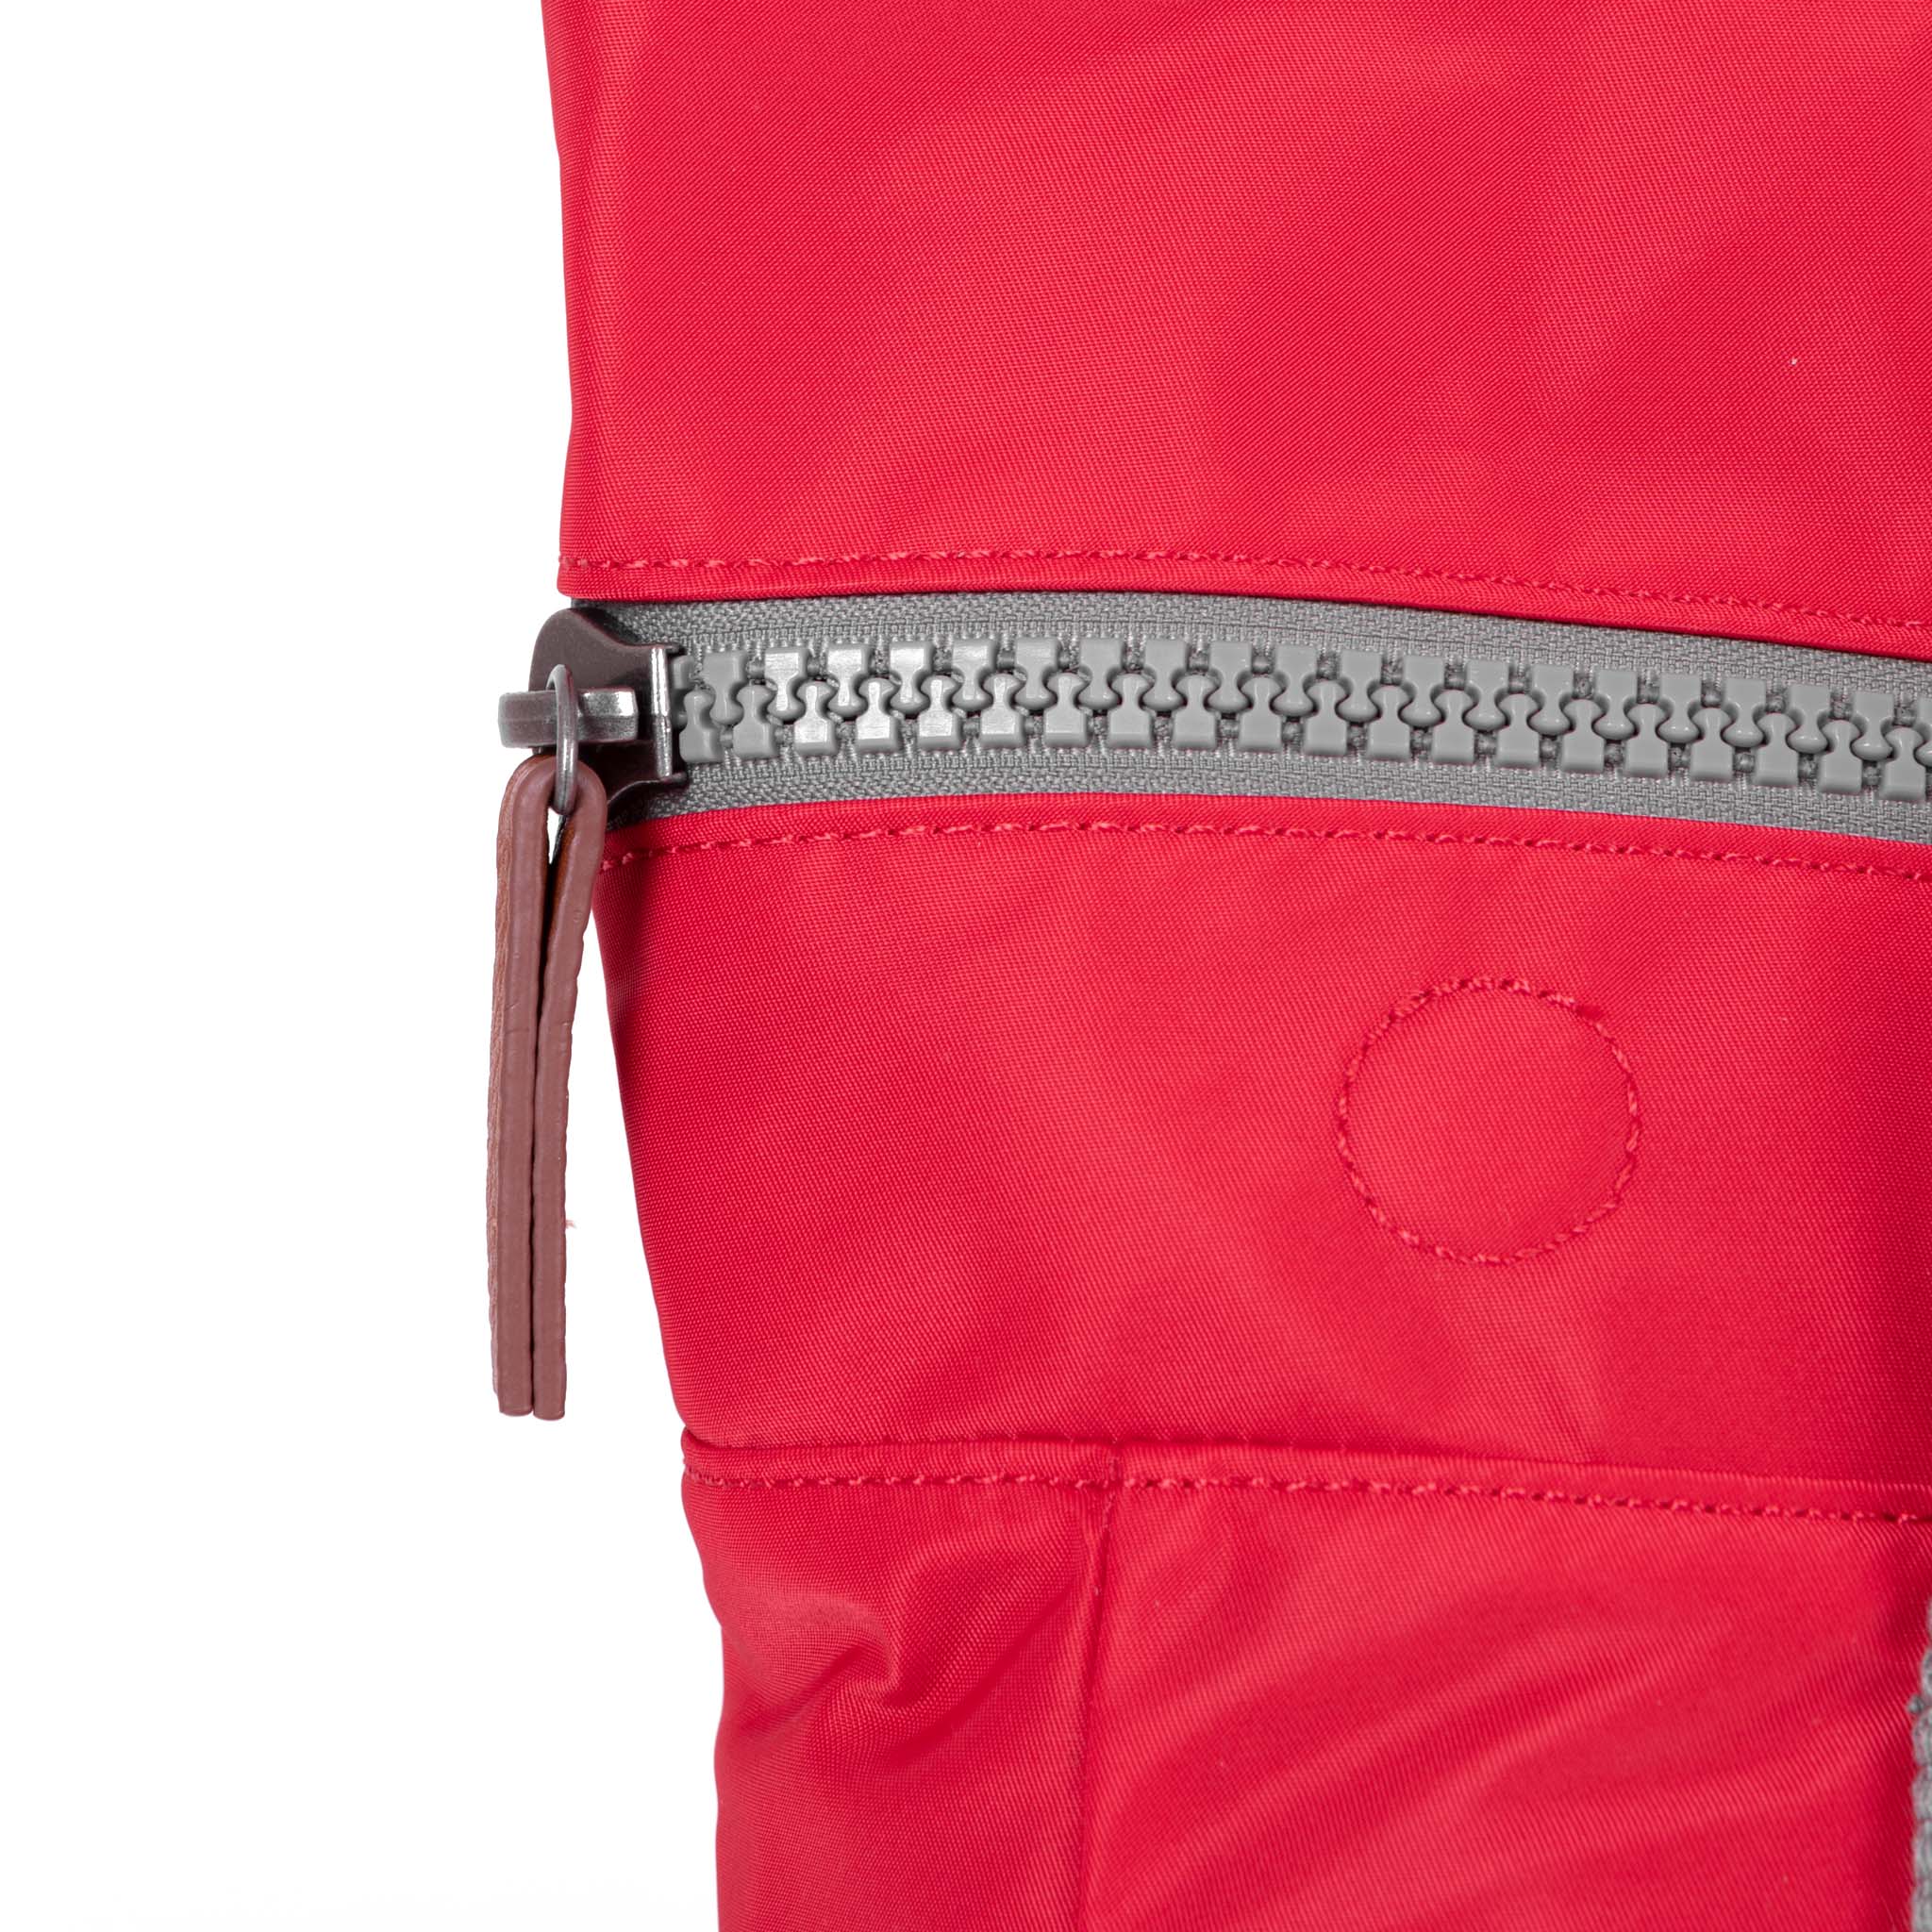 Roka London - Canfield B Small Sustainable Backpack in Mars Red